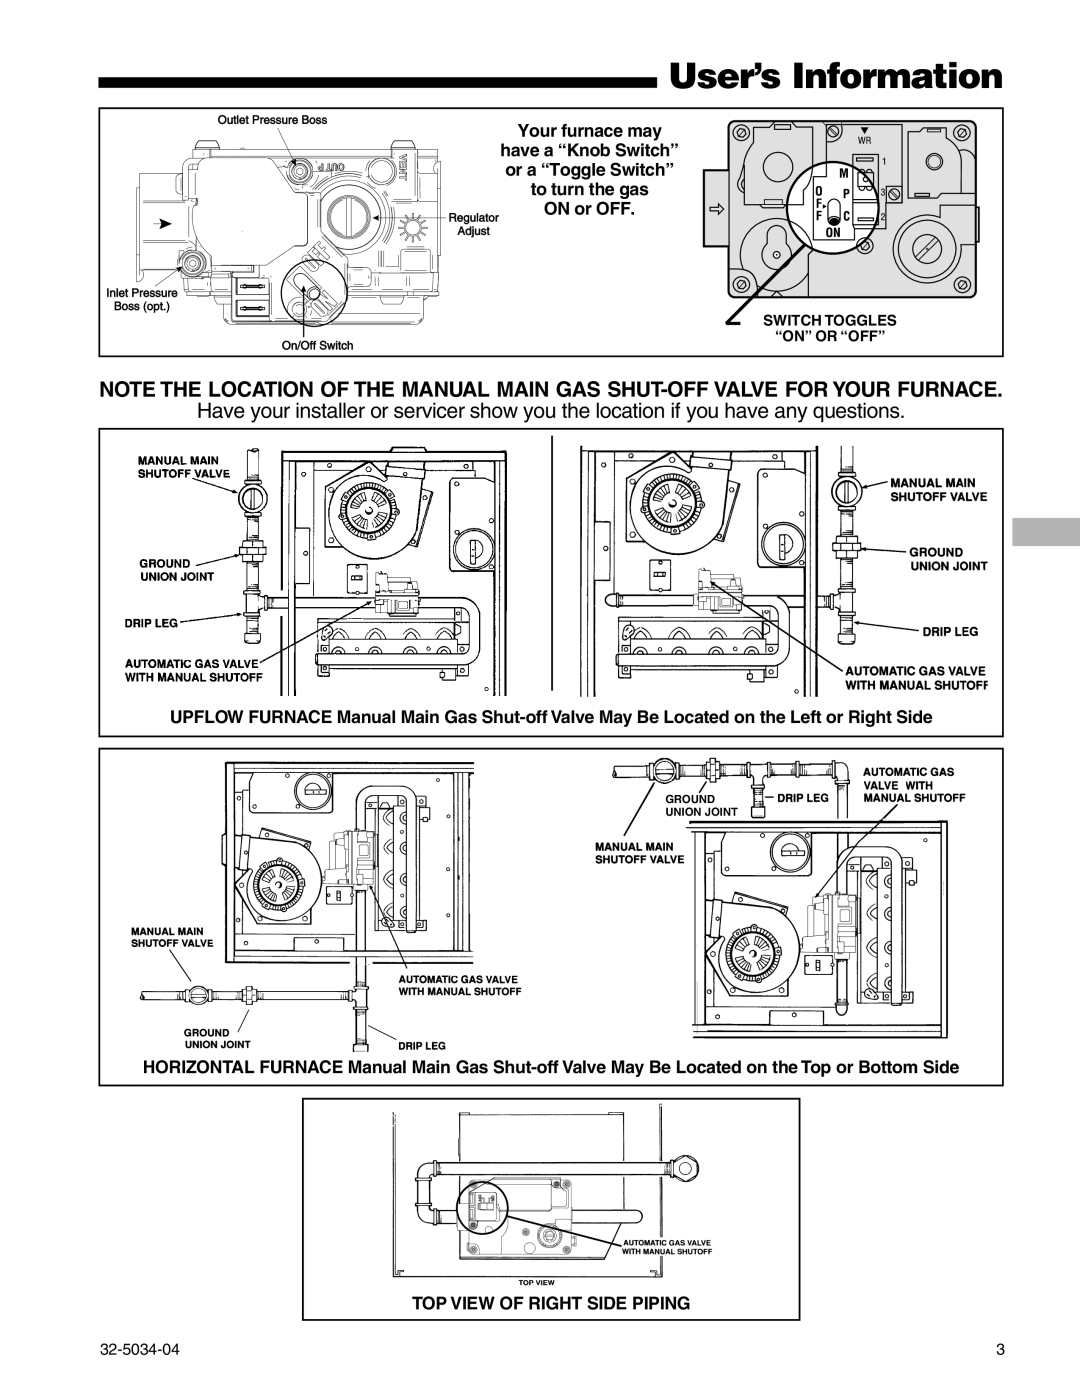 American Standard Gas Furnaces warranty User’s Information, Top View Of Right Side Piping 